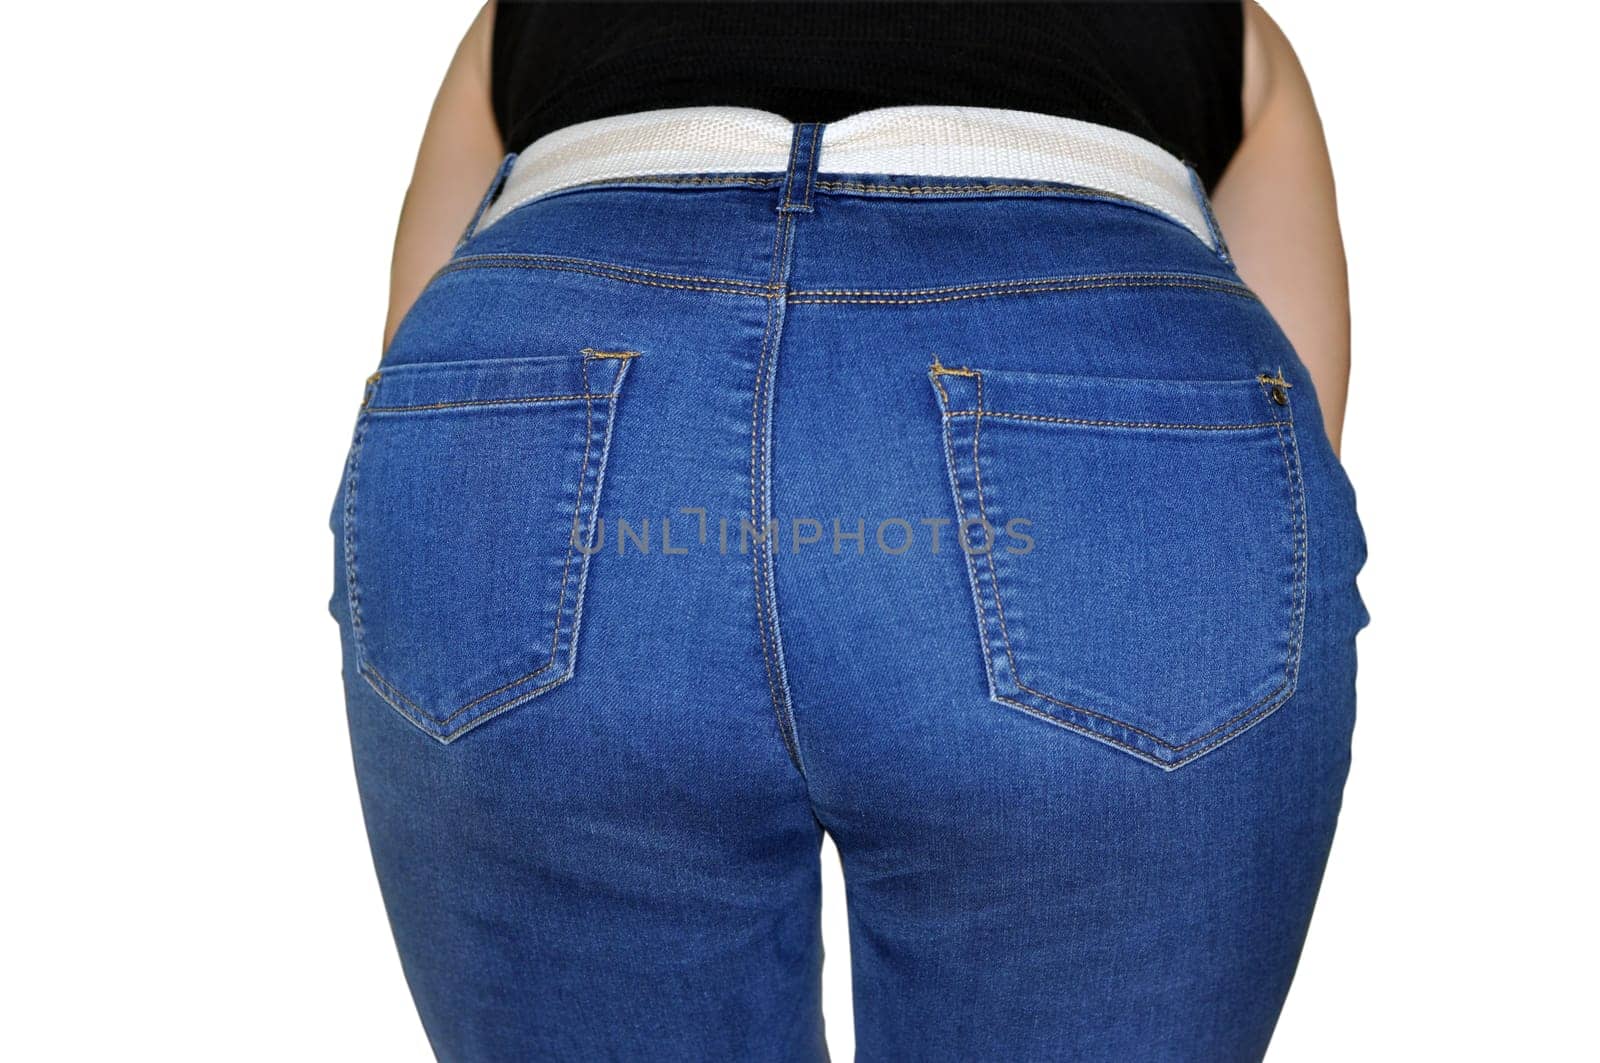 Sexy ass in jeans, sexy clothes ass in pants. Sexy woman wearing of jean pants from back. Woman wearing of jean pants from back. Female bottom in tight jeans